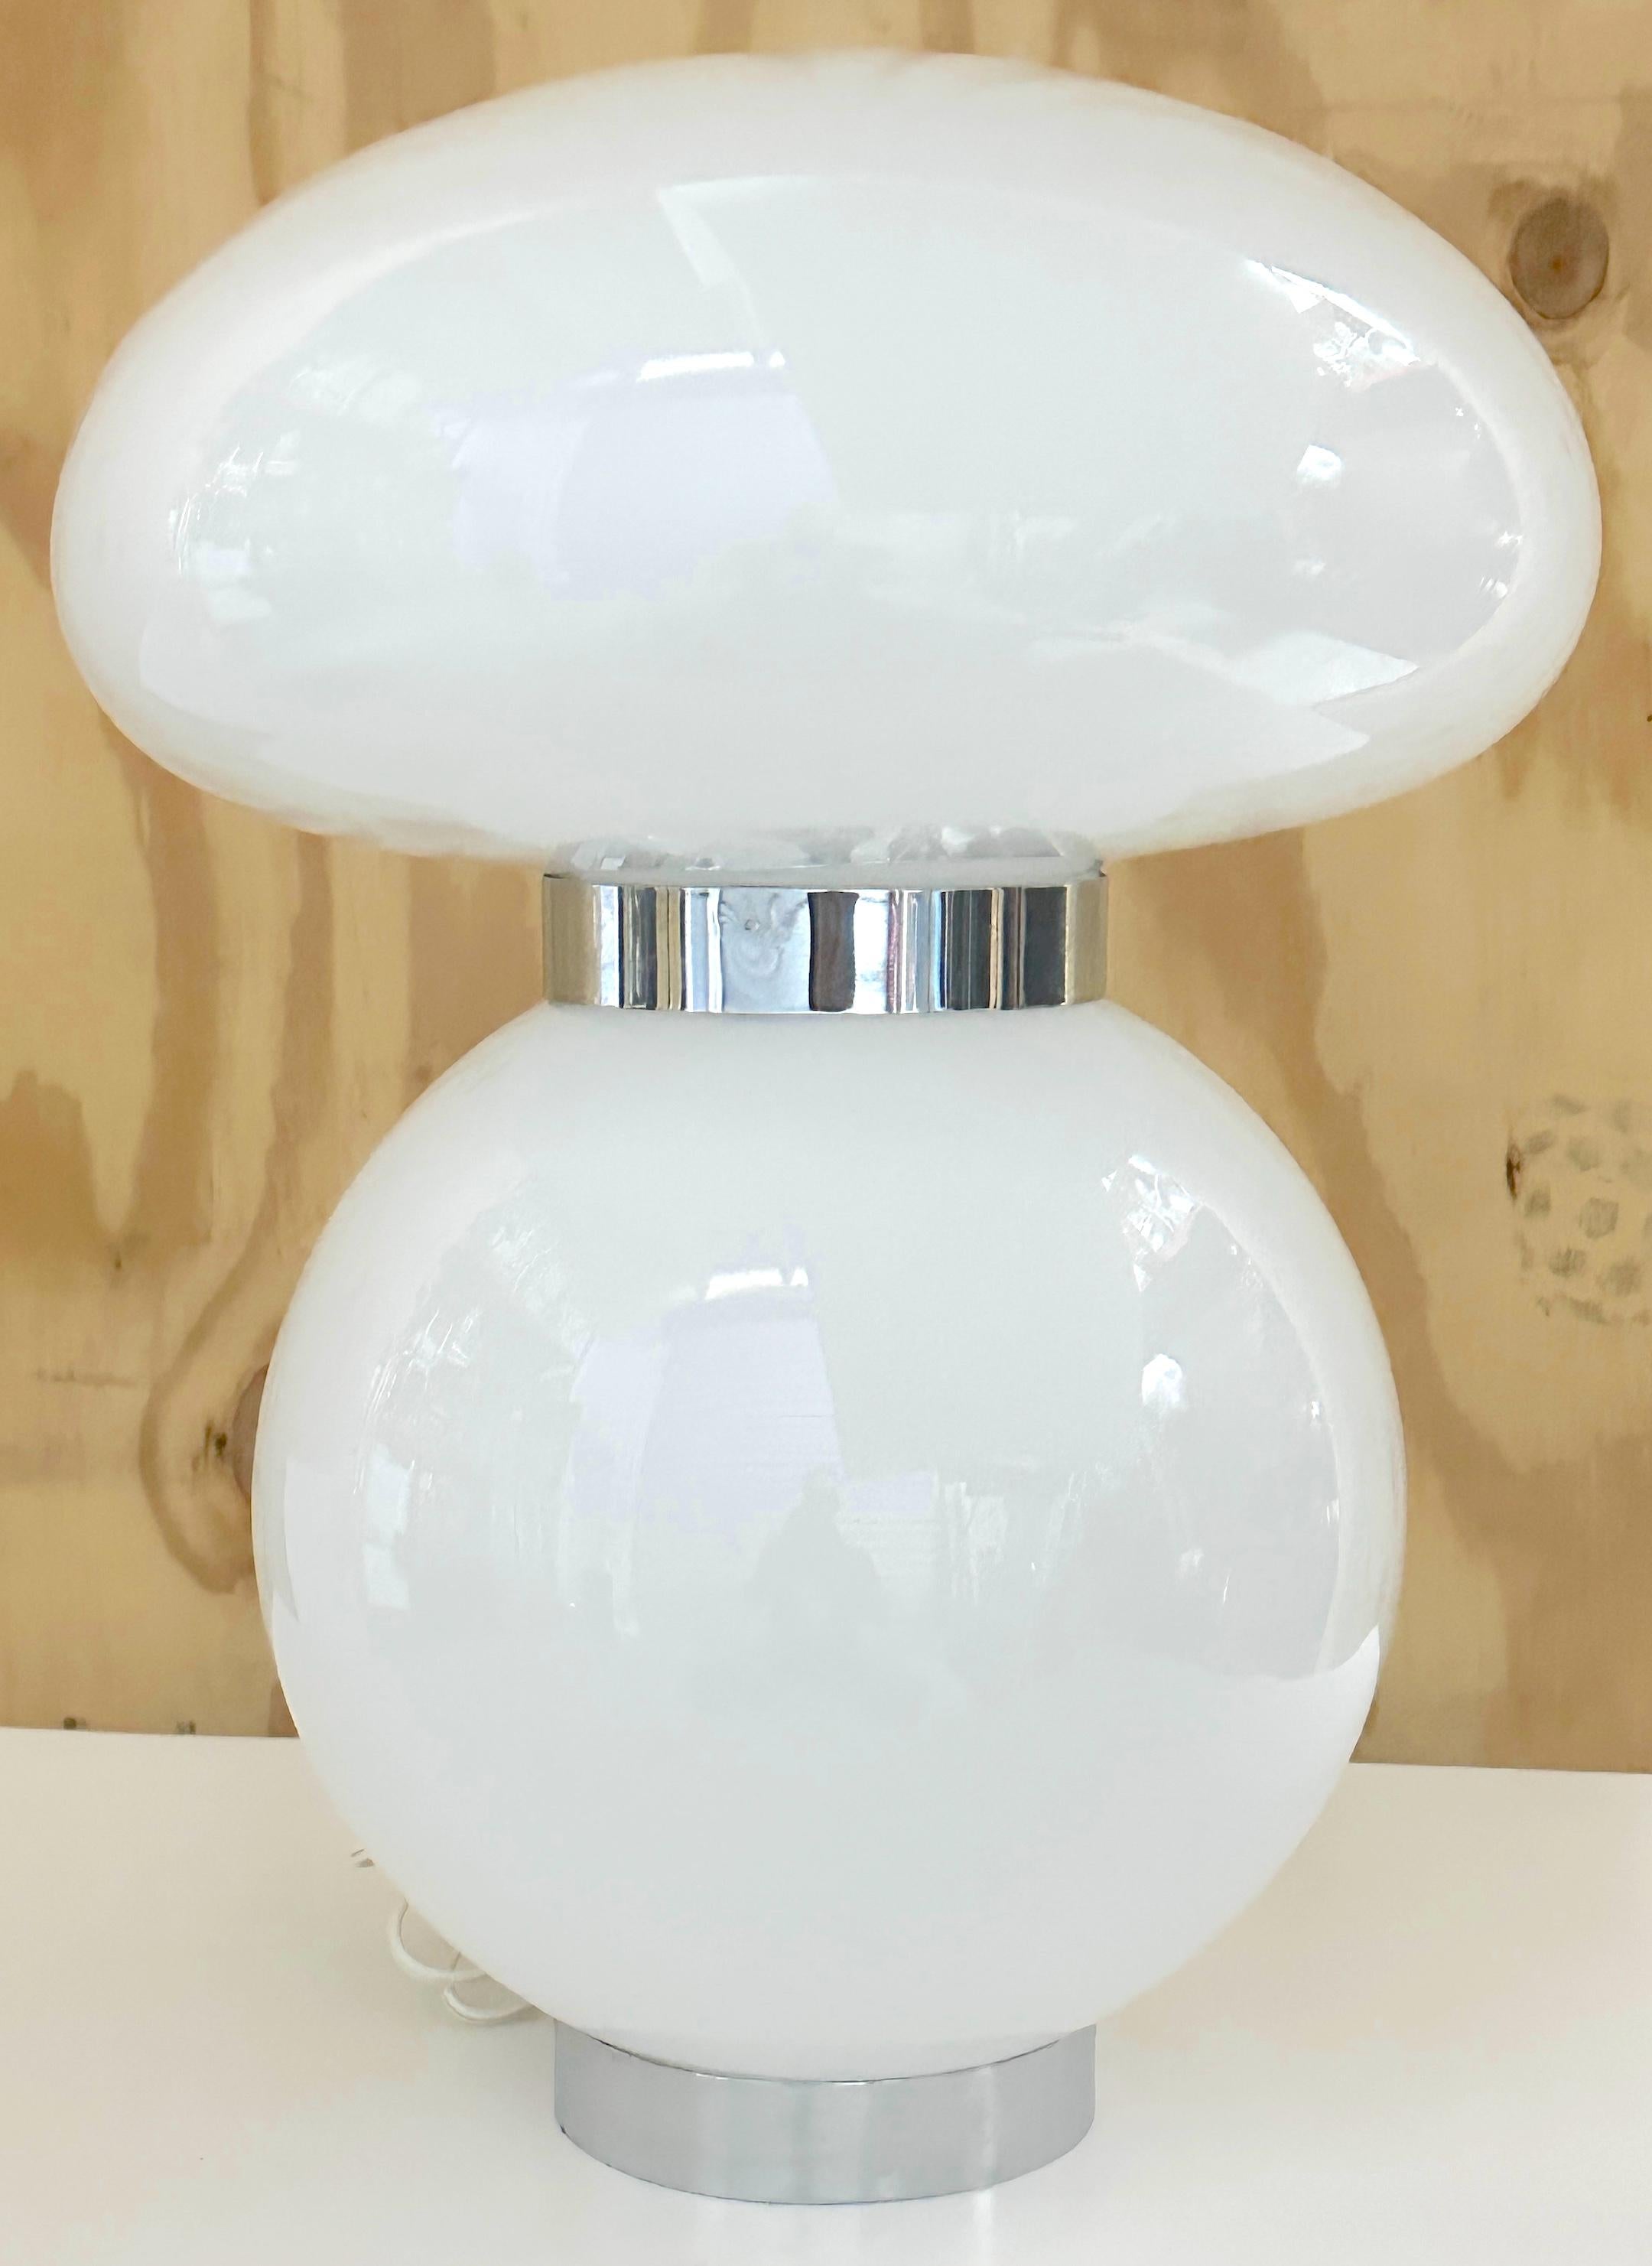 Carlo Nason for Mazzega, Mod White Murano Glass & Chrome Mushroom Lamp
Italy- Circa 1970s

A stunning Carlo Nason for Mazzega Mod White Murano Glass & Chrome Mushroom Lamp, originating from Italy in the 1970s. This exquisite lamp is a beautiful